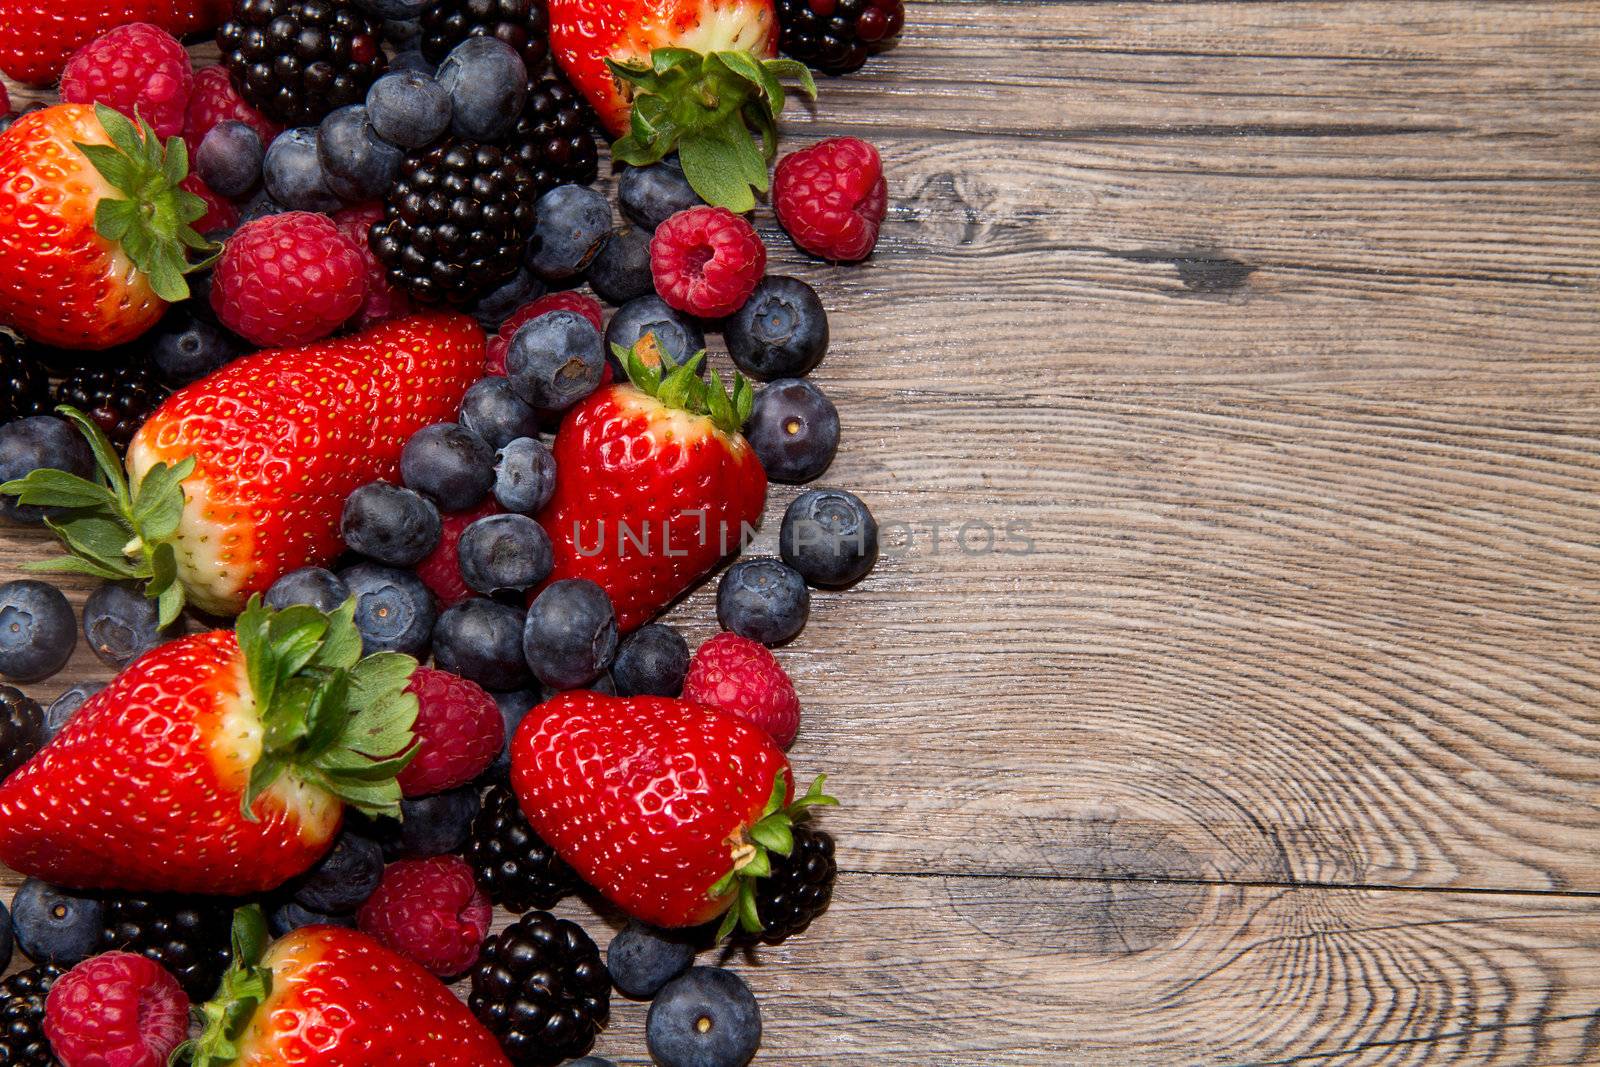 Berries on Wooden Background by lsantilli